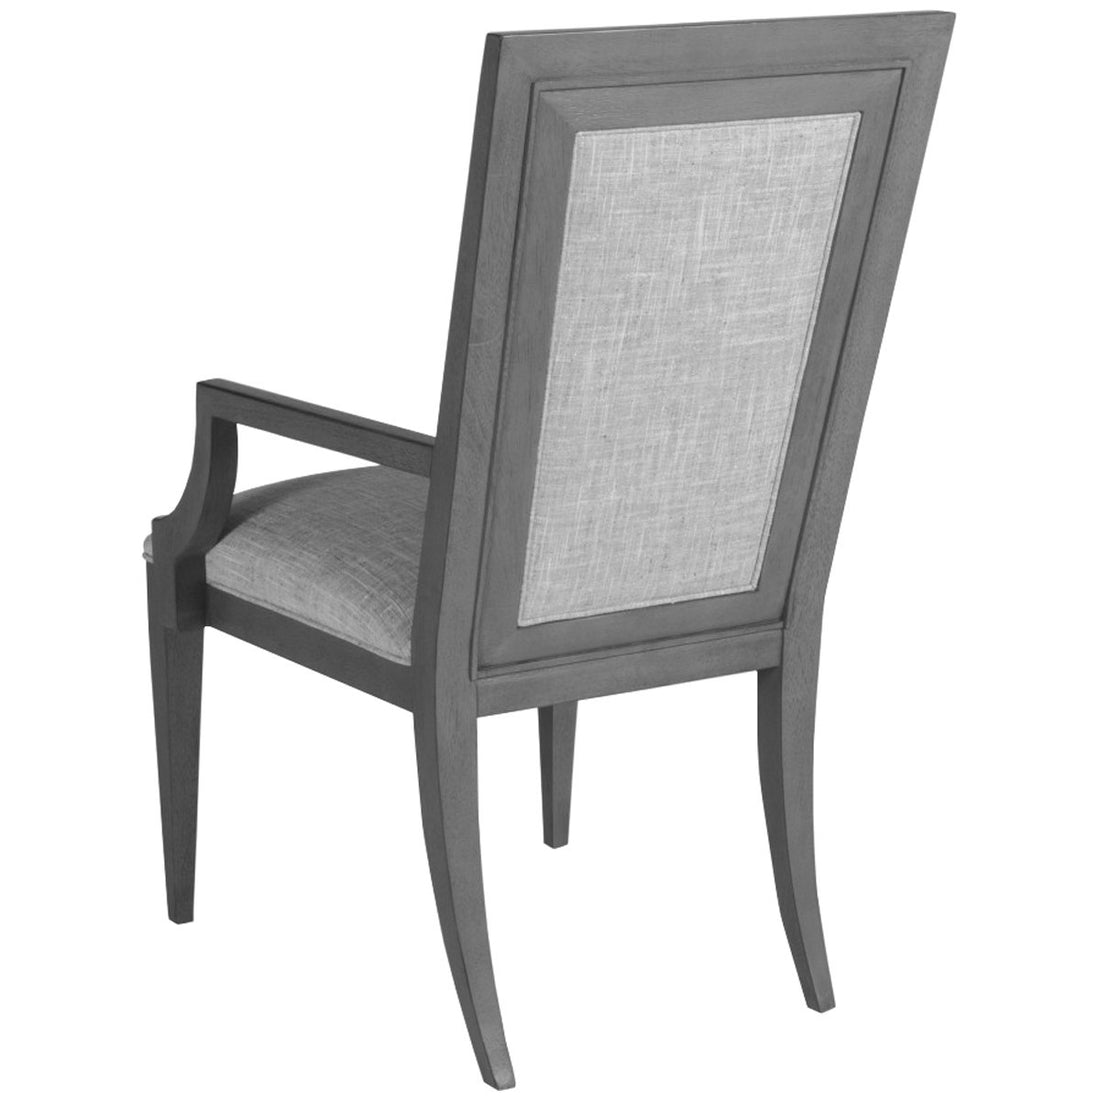 Artistica Home Appellation Upholstered Arm Chair 2200-881-01